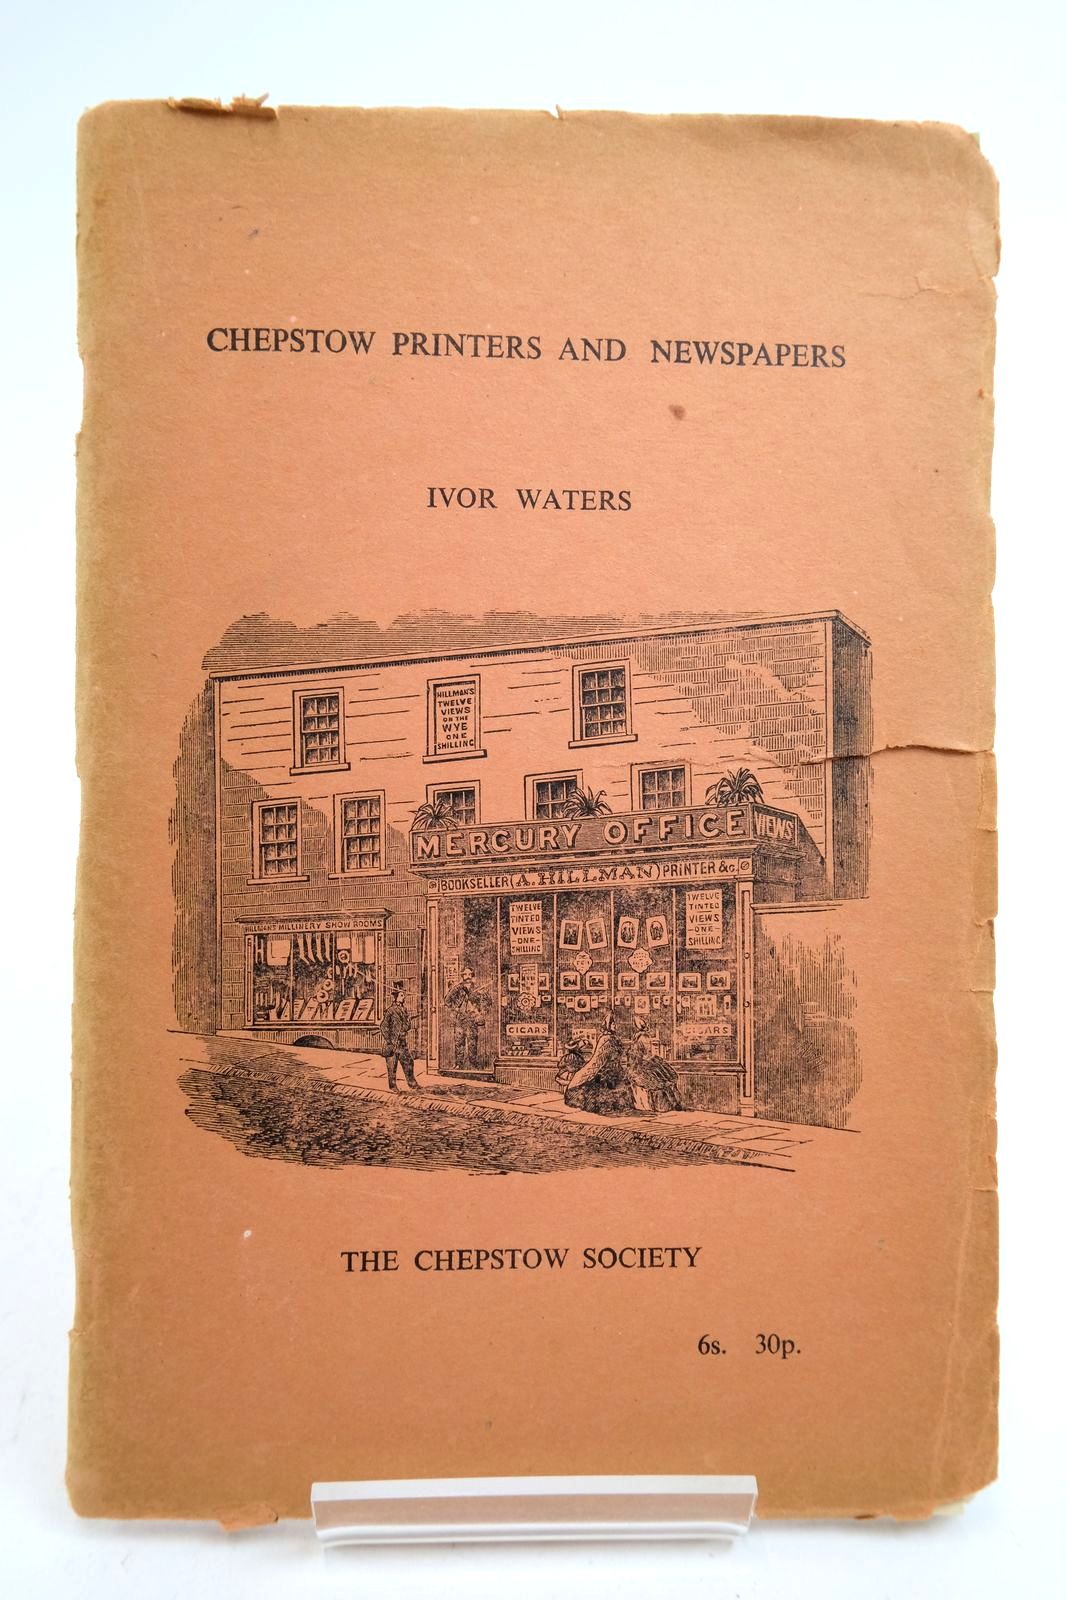 Photo of CHEPSTOW PRINTERS AND NEWSPAPERS written by Waters, Ivor published by The Chepstow Society (STOCK CODE: 2140407)  for sale by Stella & Rose's Books